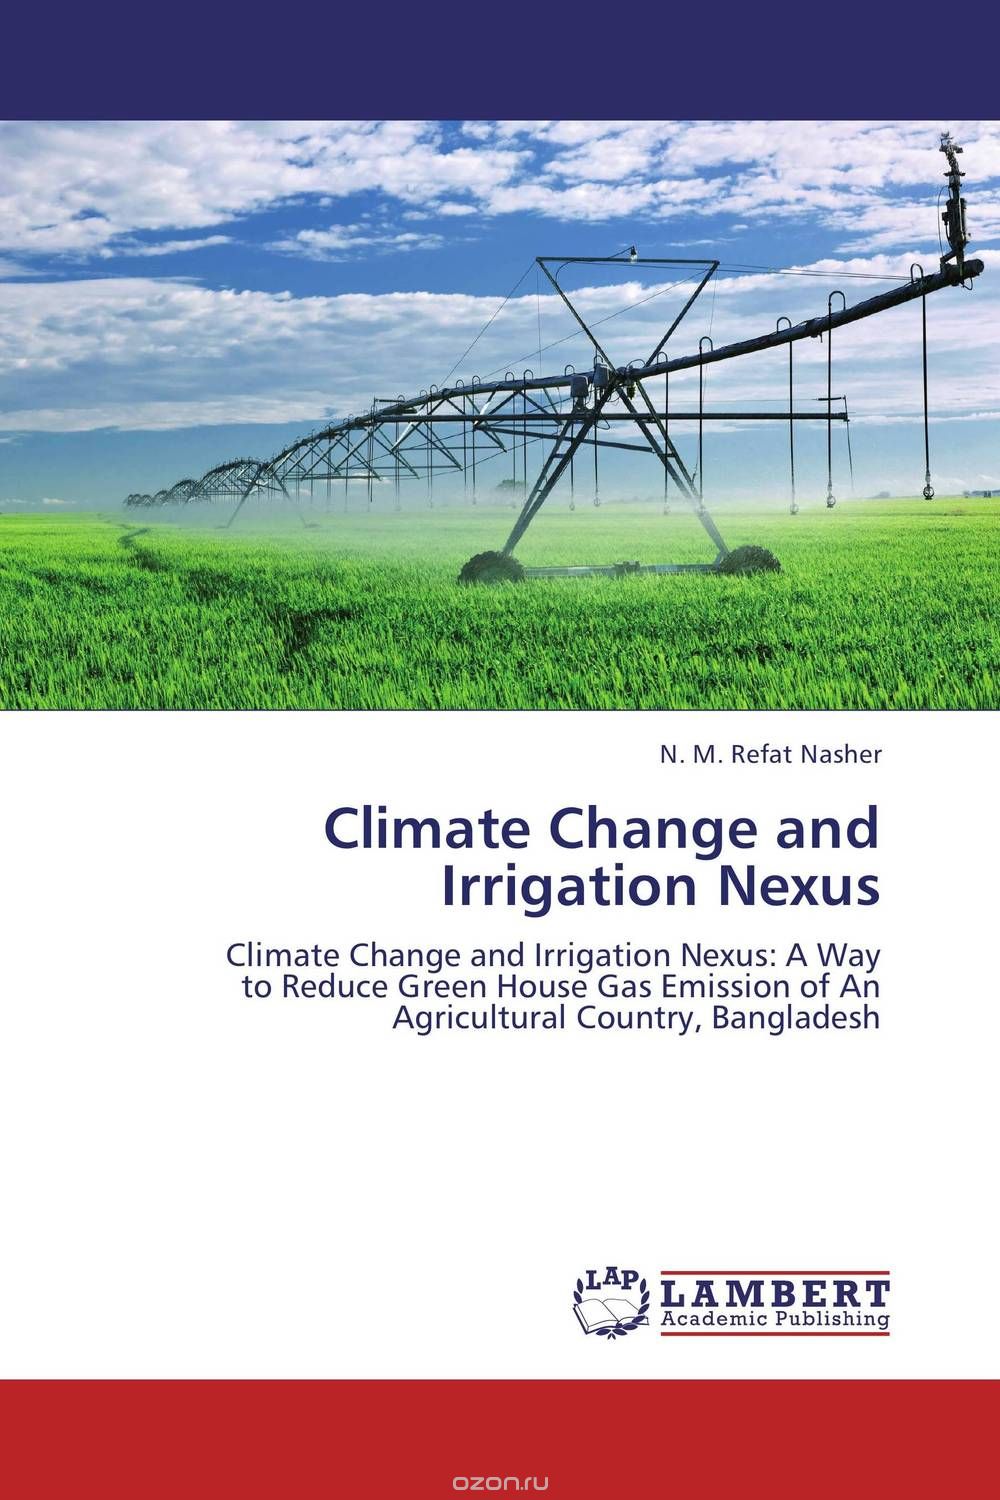 Climate Change and Irrigation Nexus